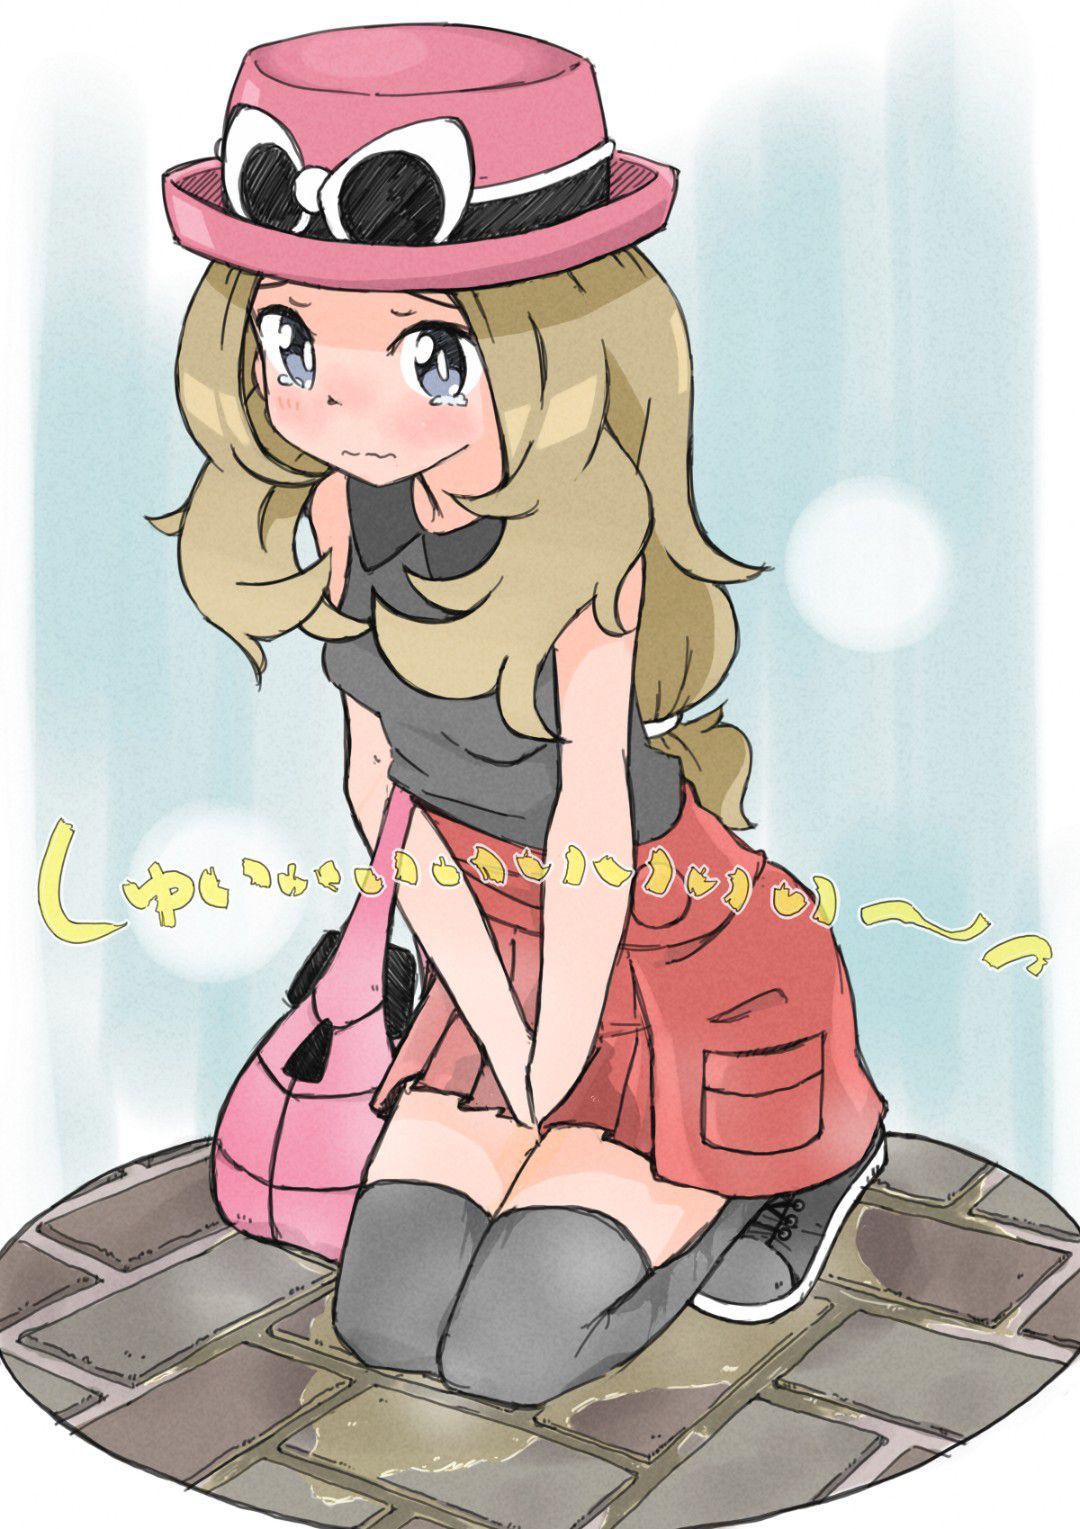 【Pocket Monsters】Erotic image that sticks through with Serena's etch 18